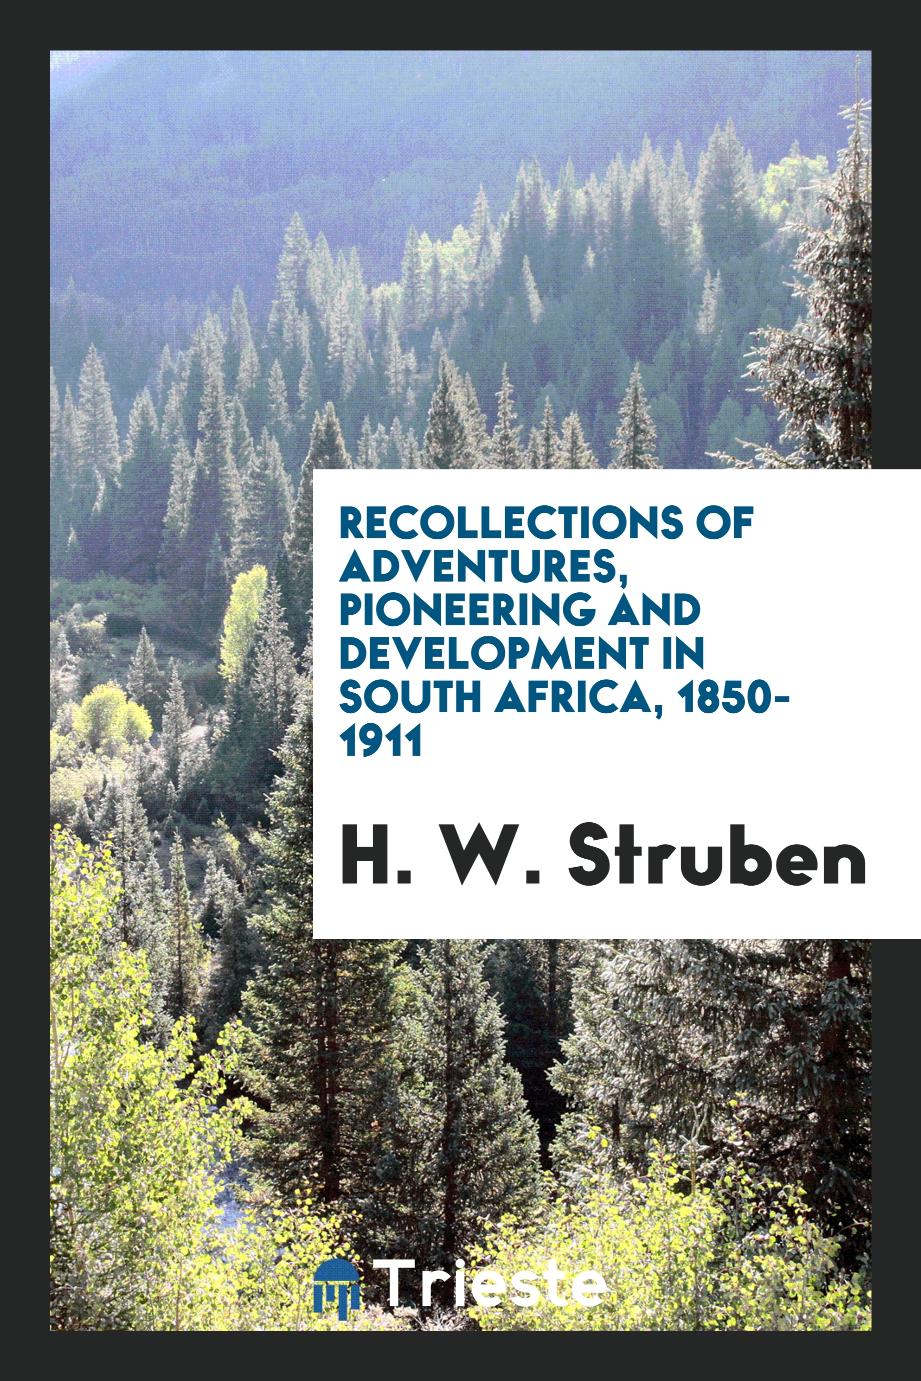 H. W. Struben - Recollections of adventures, pioneering and development in South Africa, 1850-1911